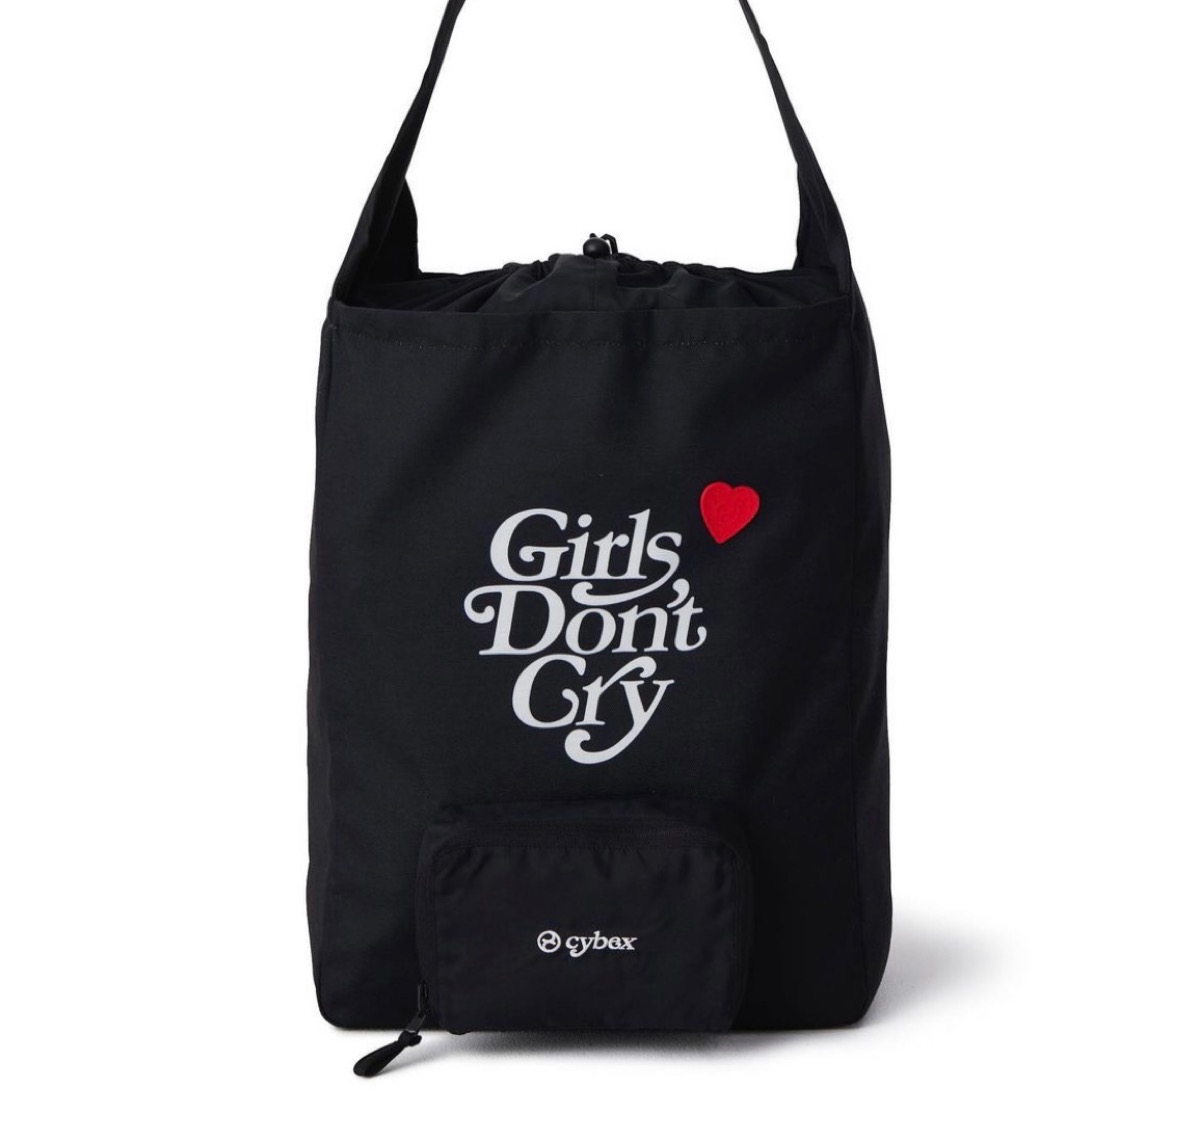 VERDY'S GIFT SHOP for 伊勢丹新宿店」で販売された Girls Don't Cry 